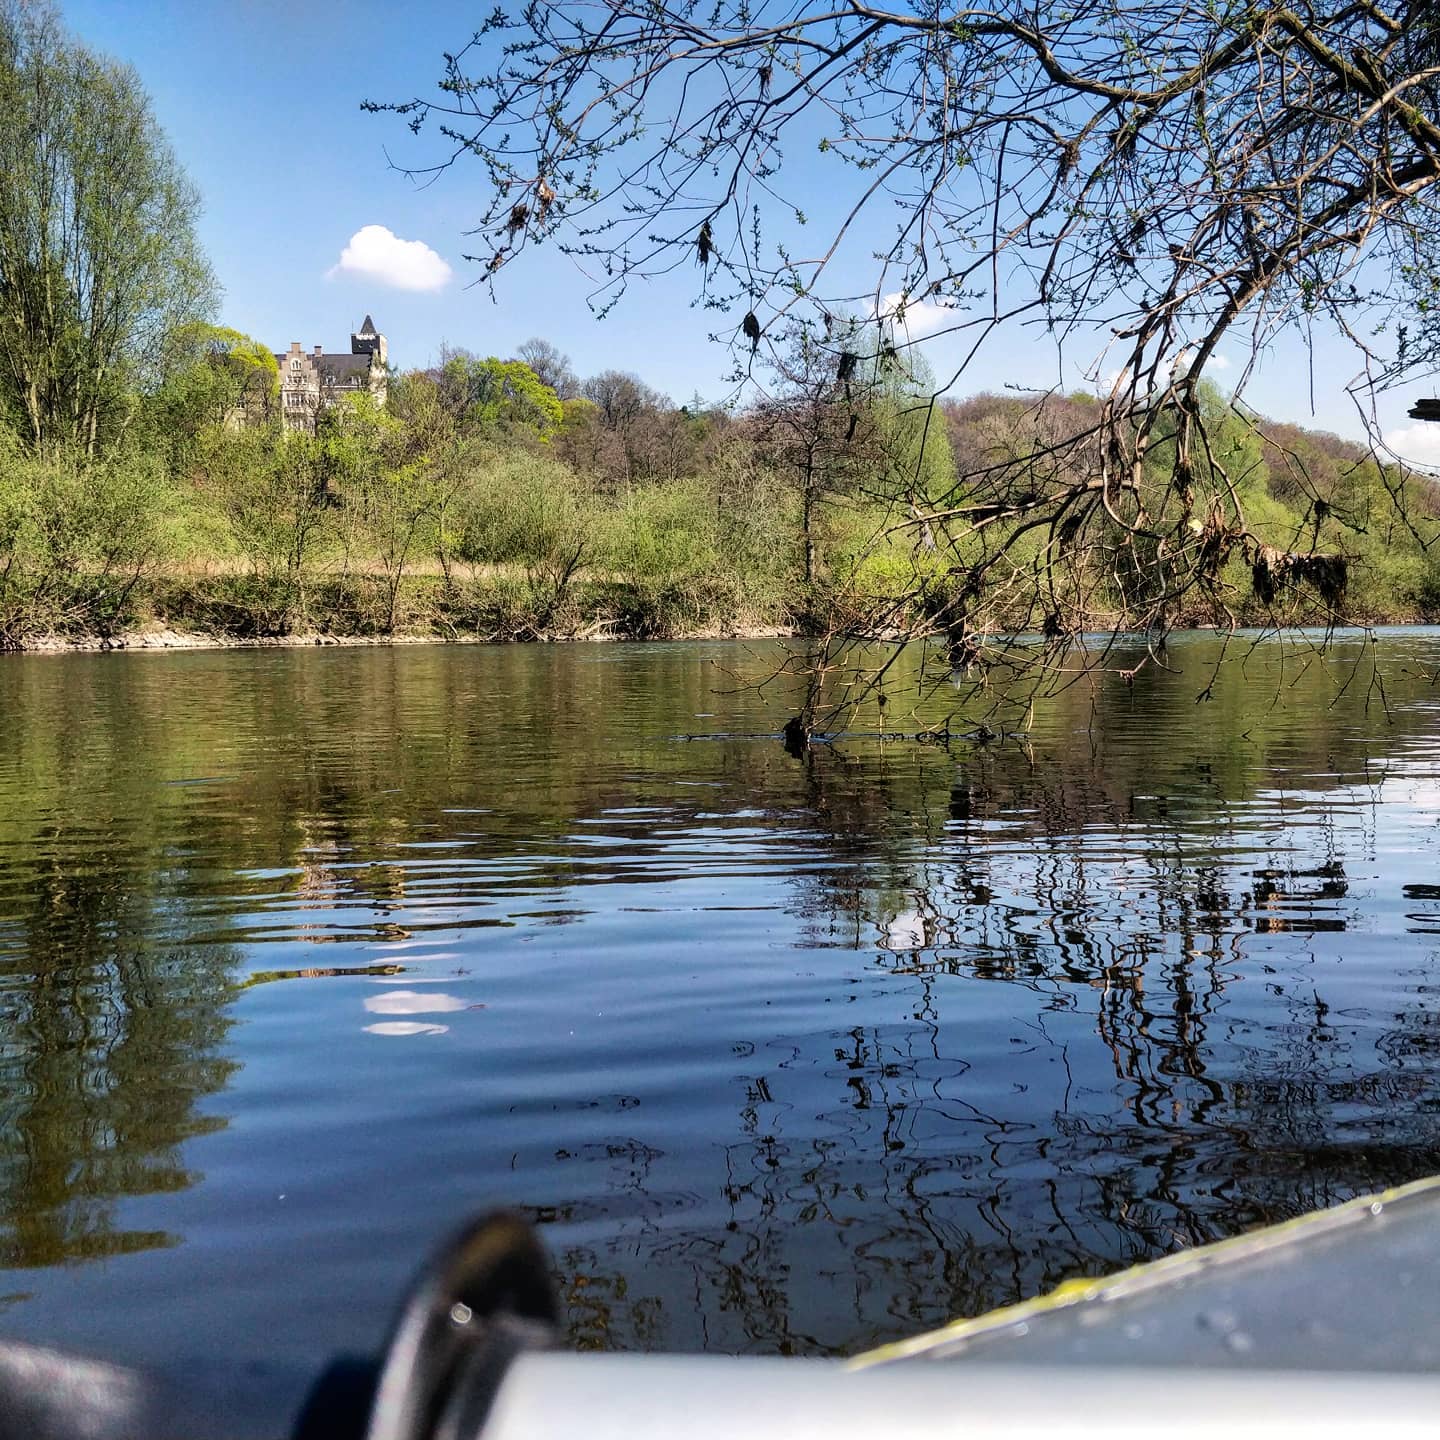 While we did not #stayAtHome this was definitely #socialdistancing - the #ruhr was emptier then ever before. What an relaxing day on the water. And we saw at least five #beavers <3